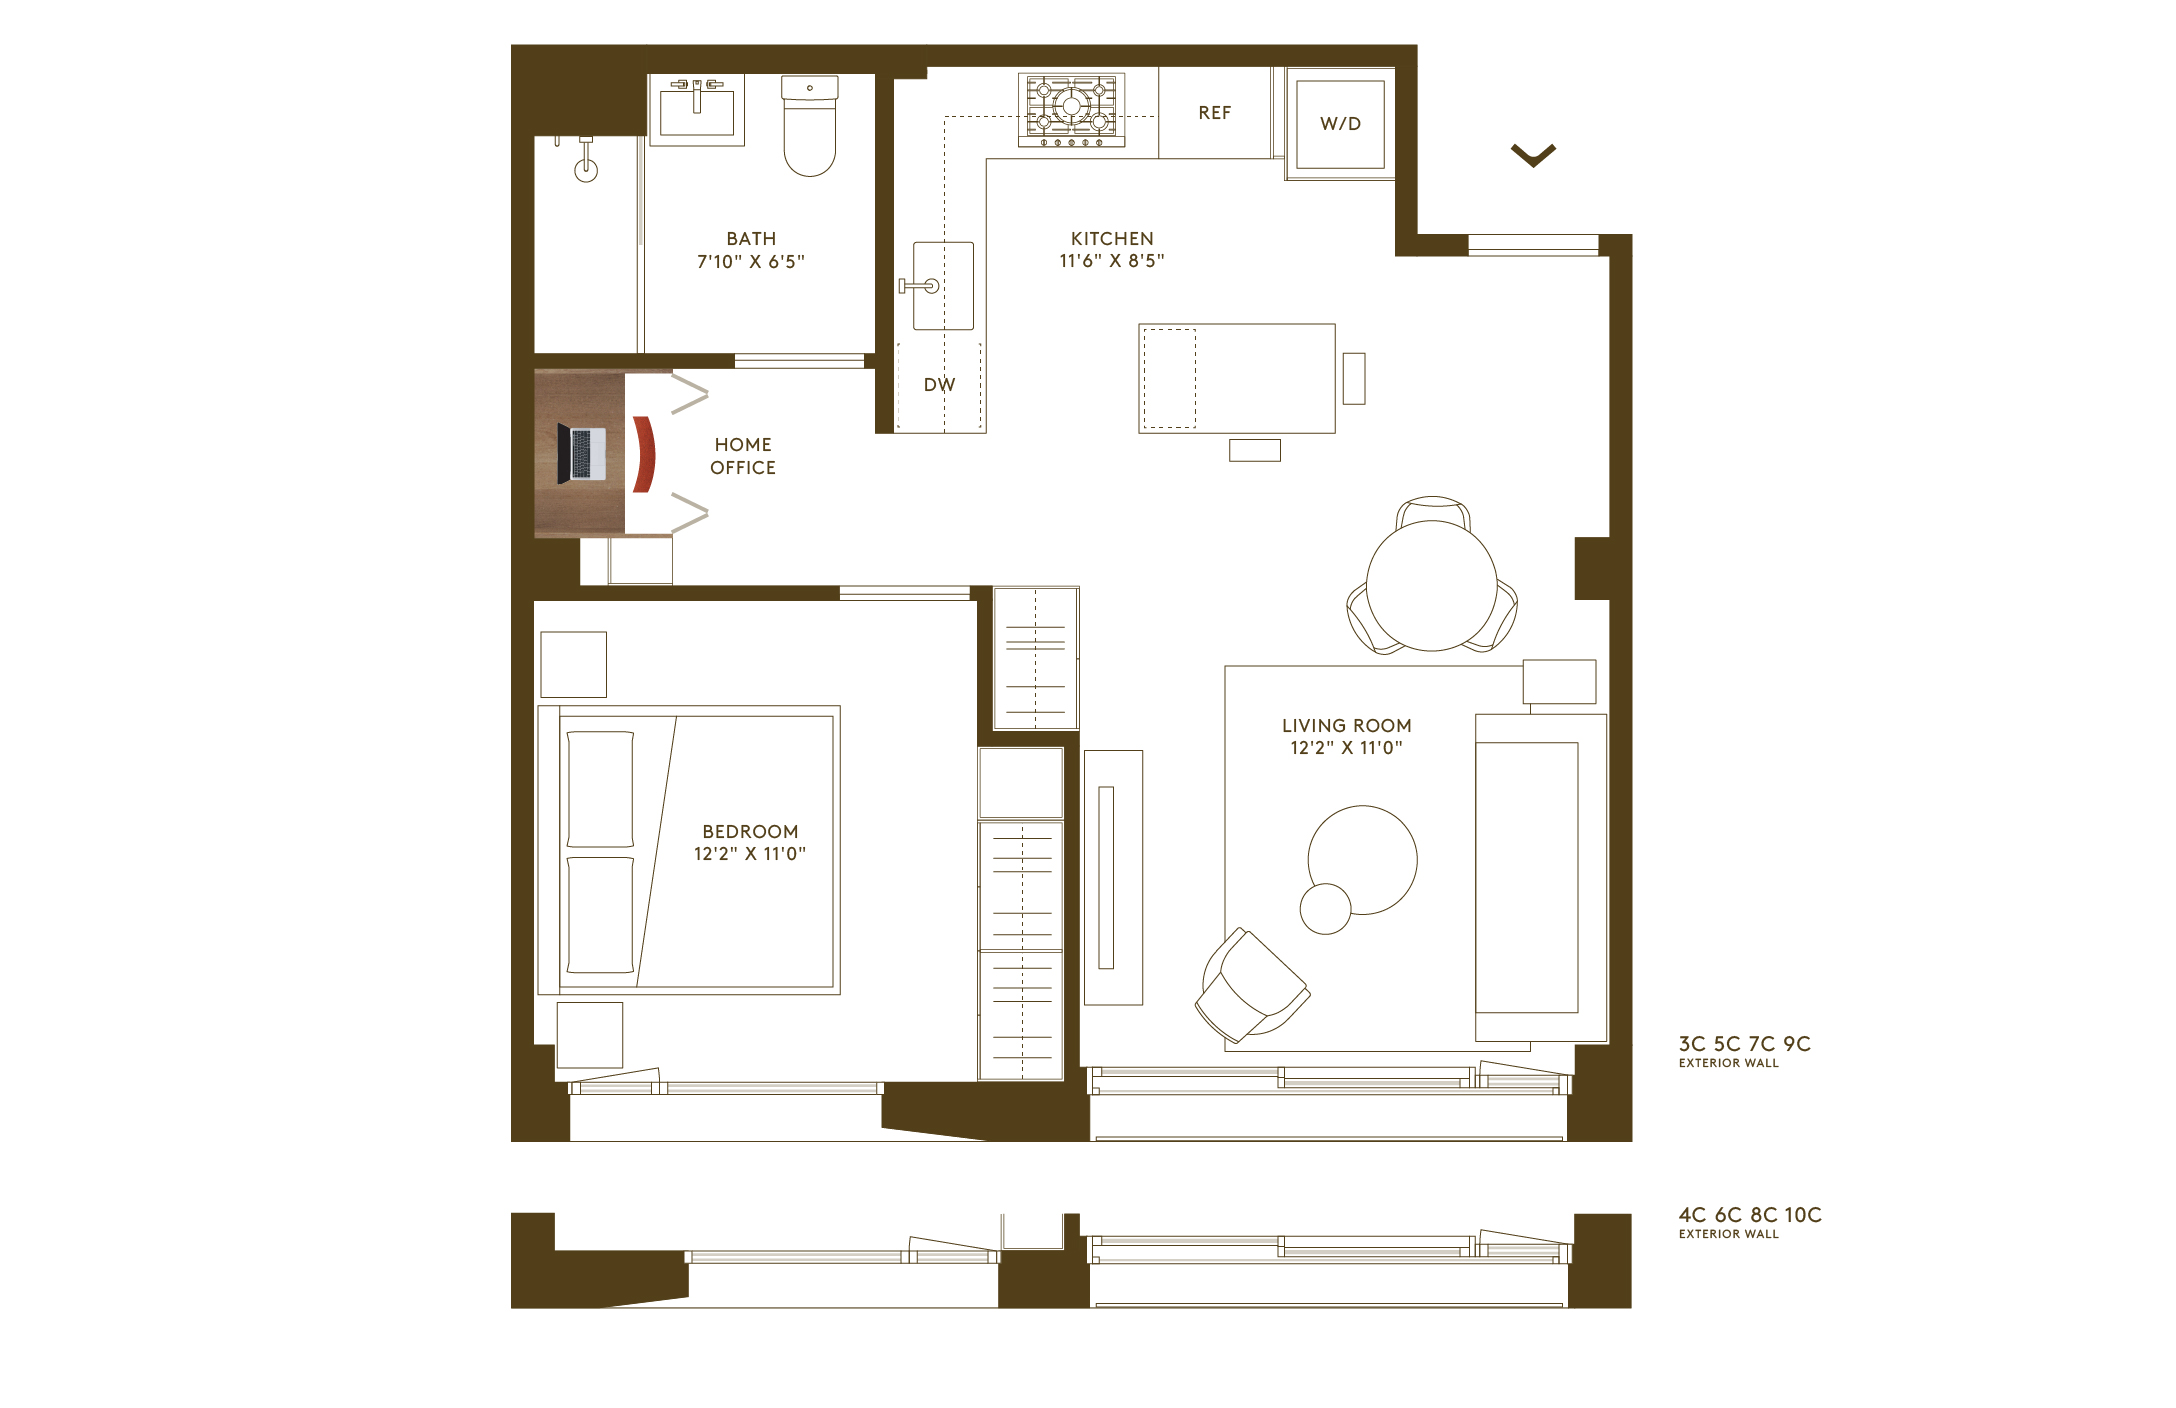 Floorplan of 1-bedroom condo with home office at Hendrix House condominium building in Gramercy NYC.